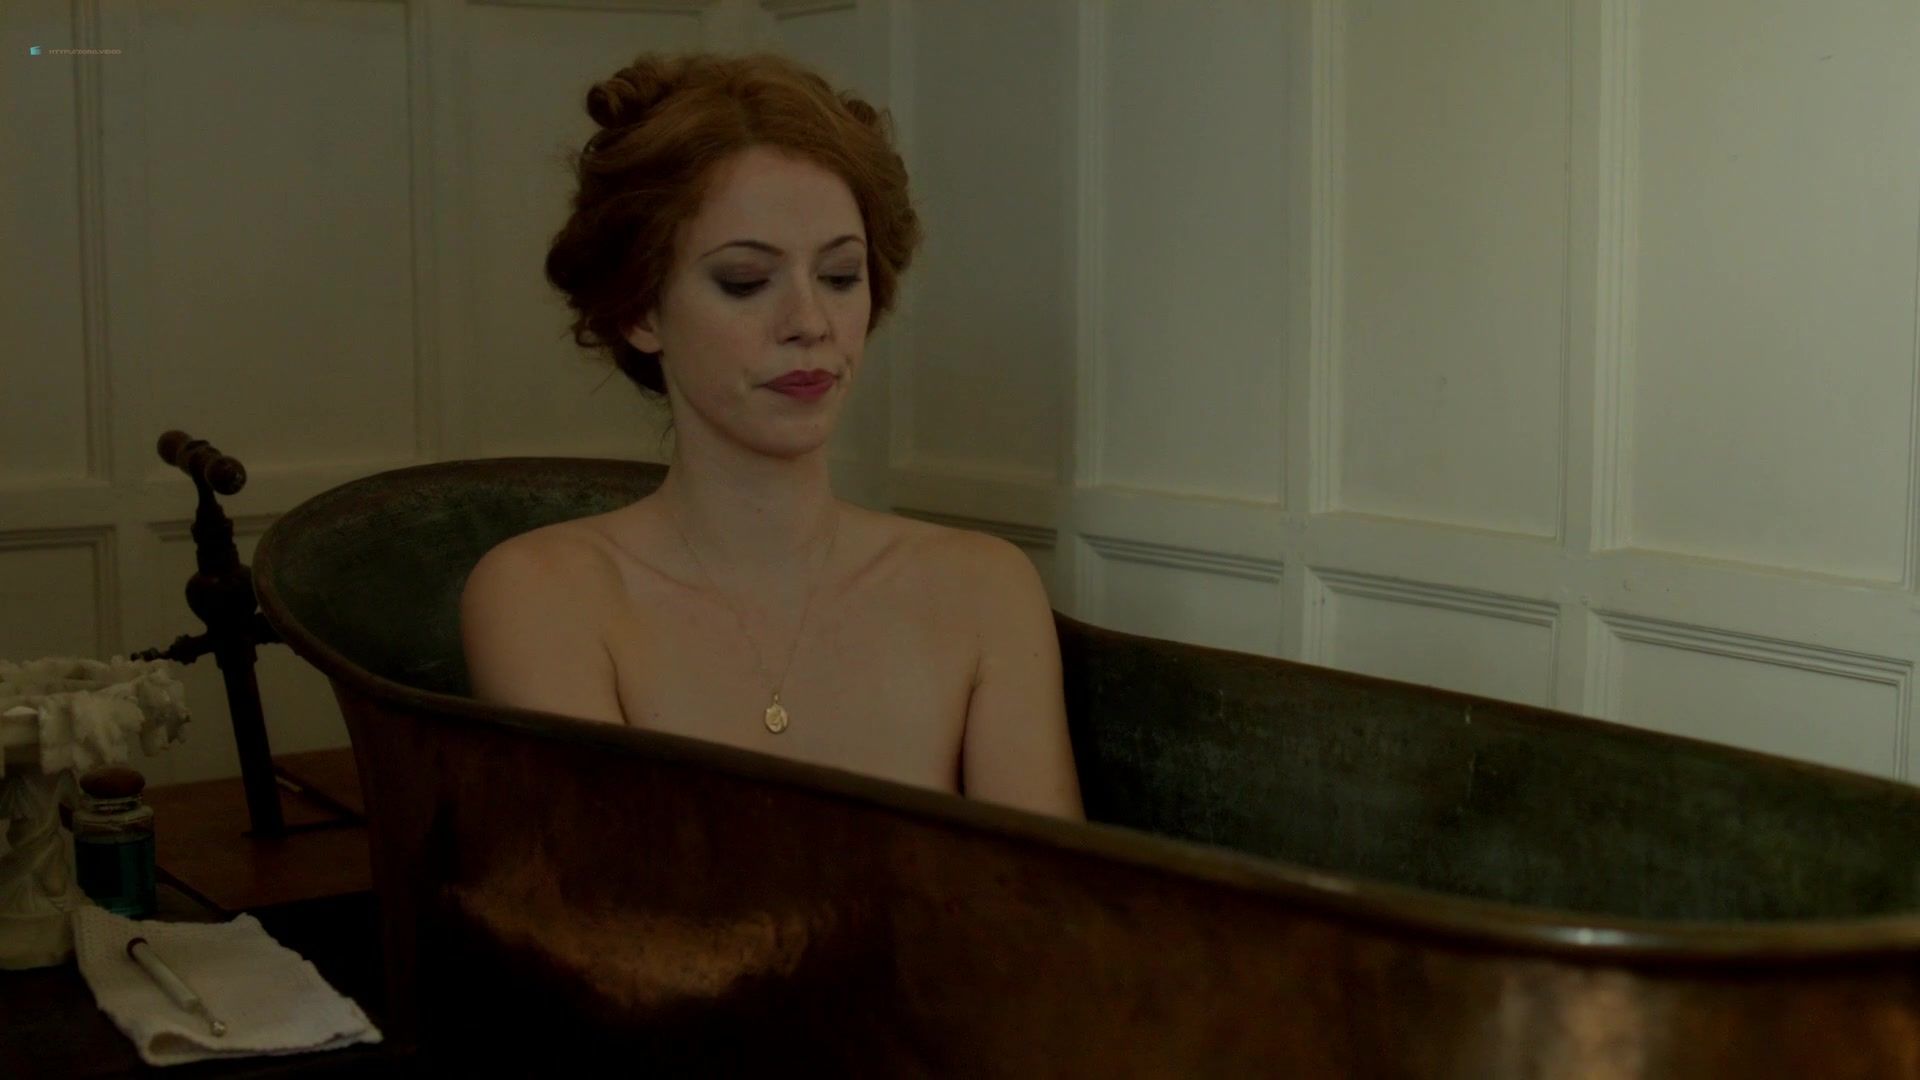 Assfucking Rebecca Hall, Adelaide Clemens naked - Parades End (2012) GayAnime - 1